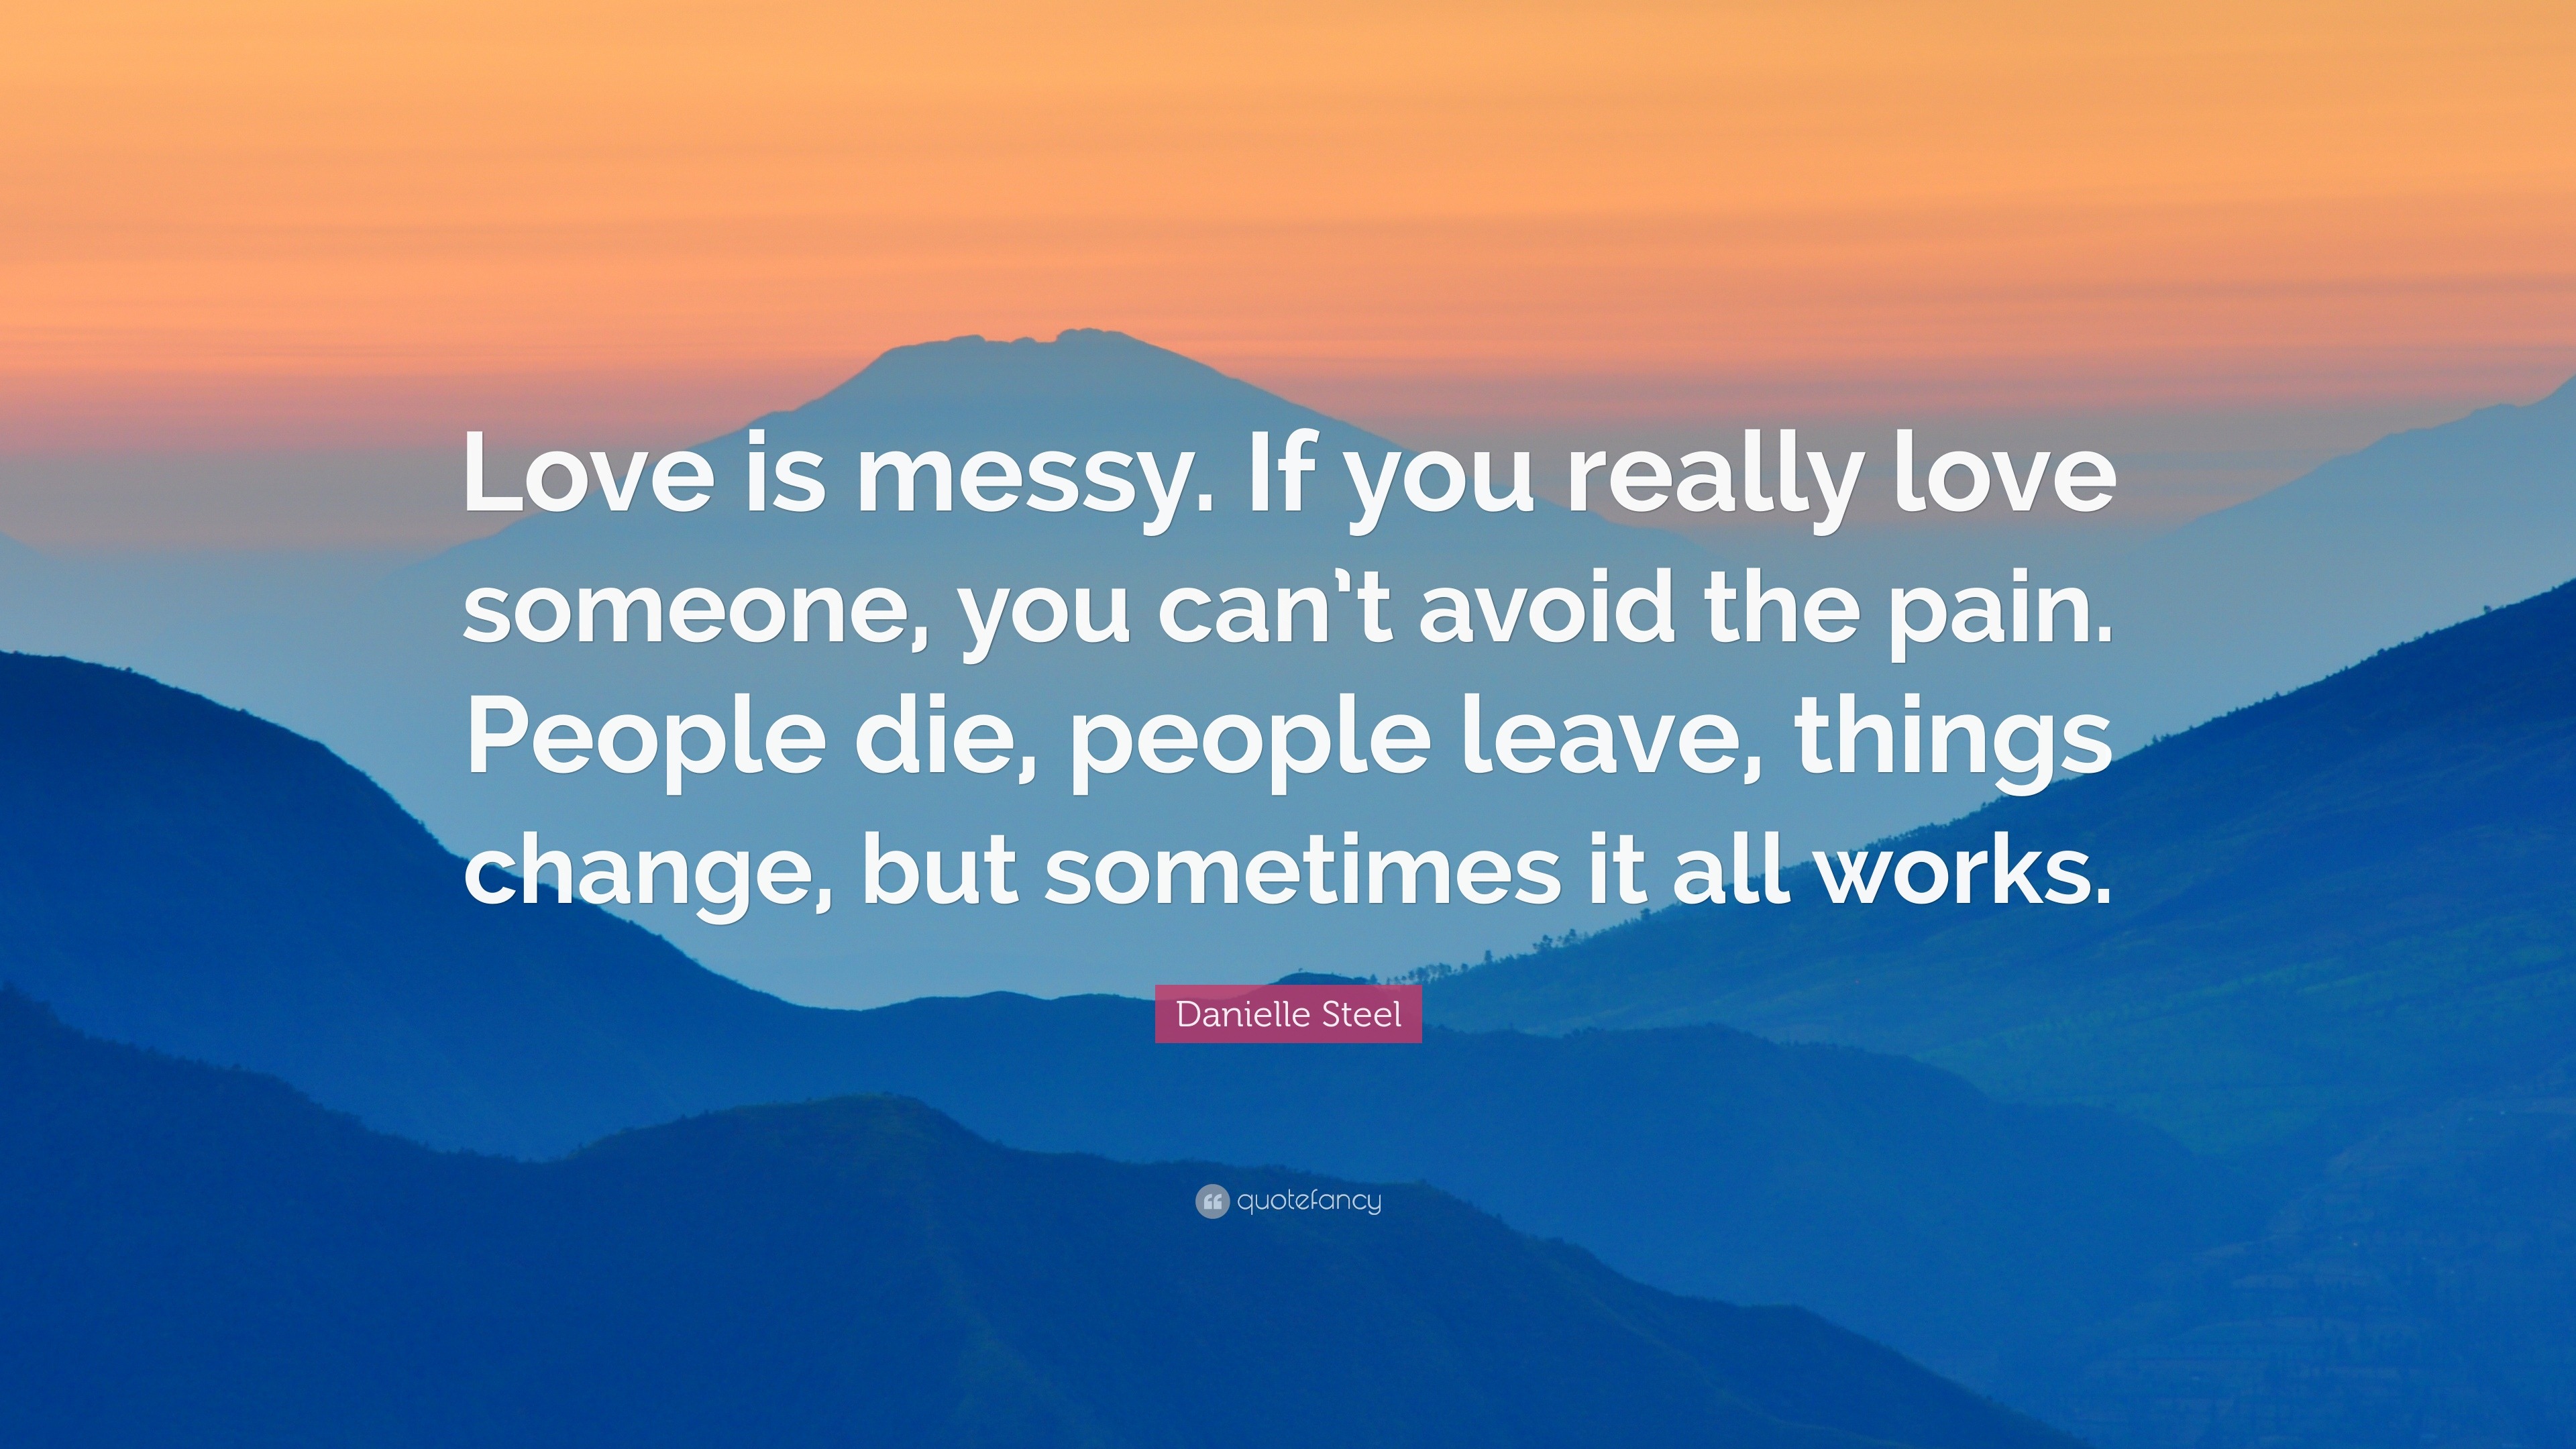 Danielle Steel Quote “Love is messy If you really love someone you